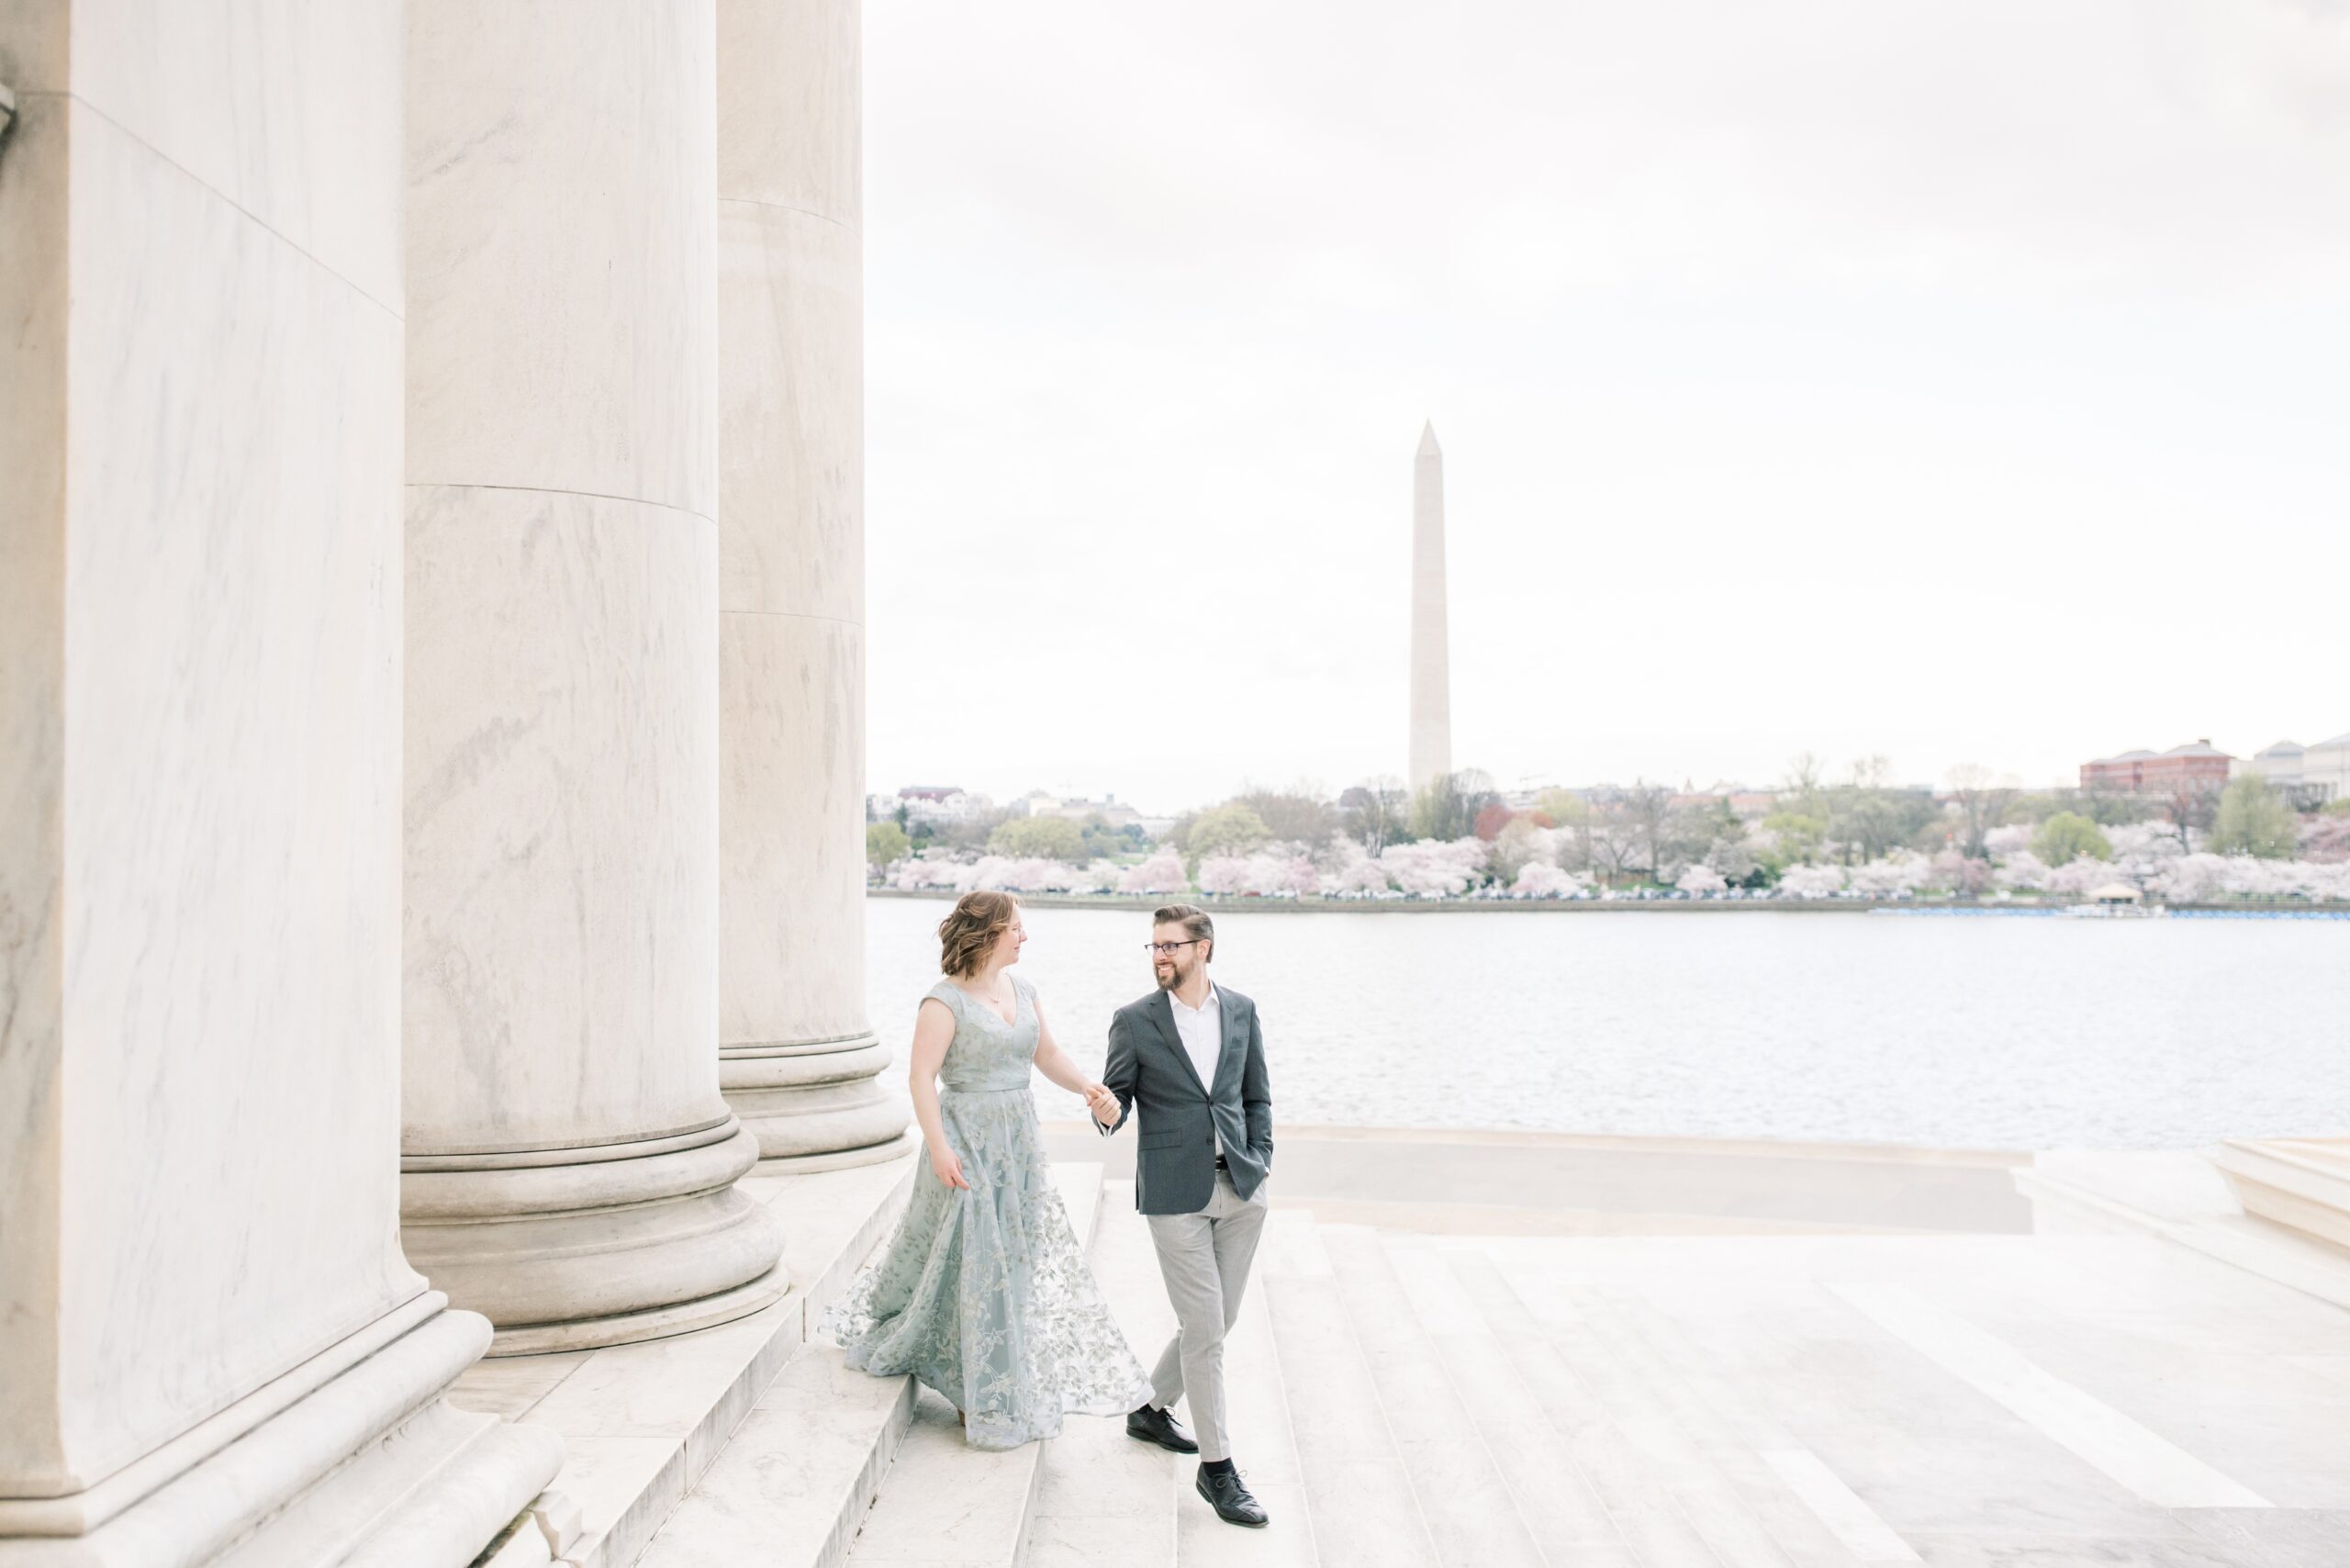 A stunning cherry blossom anniversary session at the Tidal Basin in Washington, DC during peak bloom.